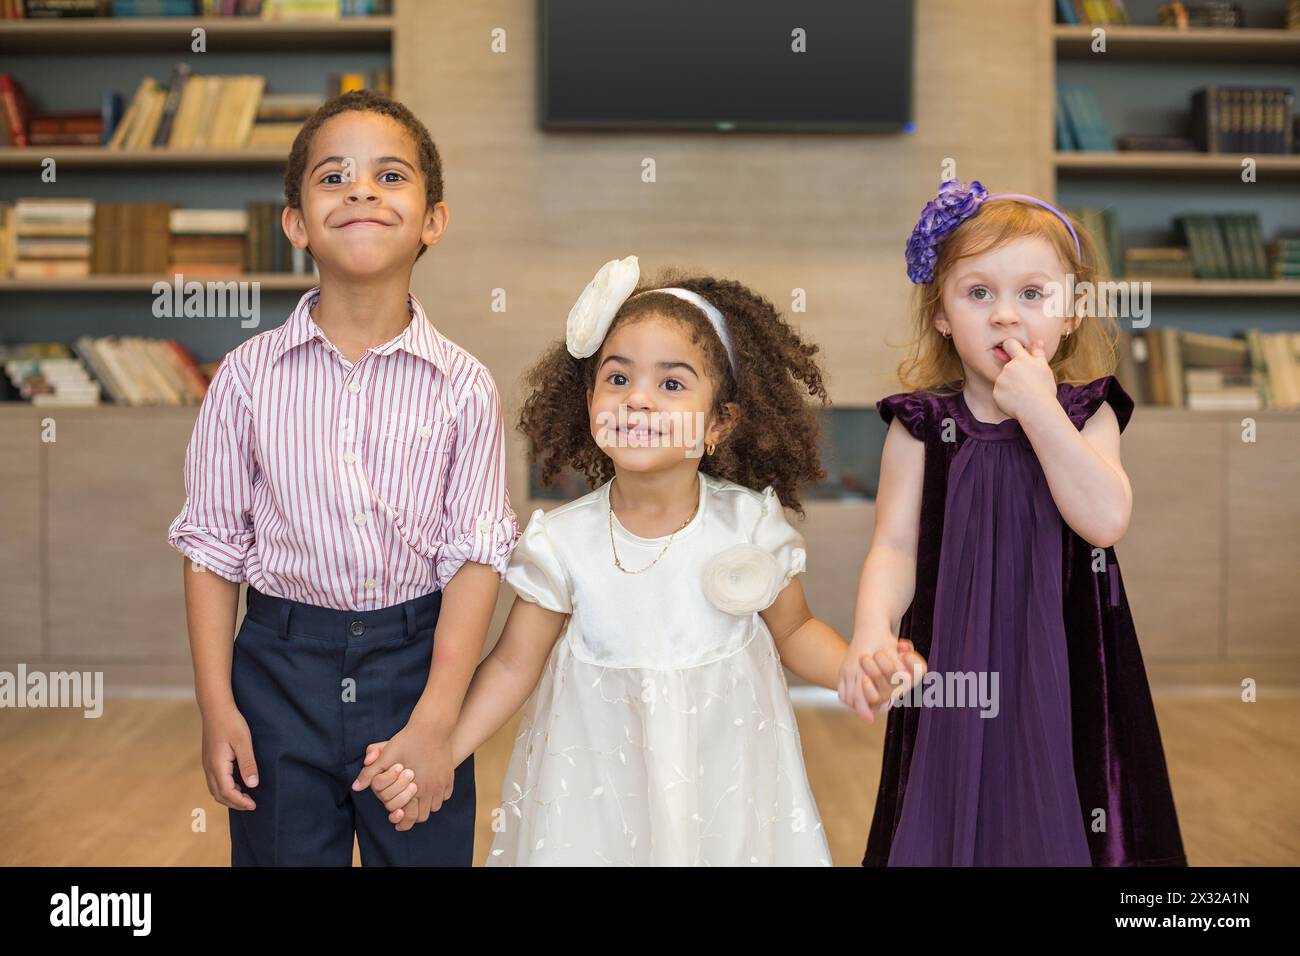 Three little children in celebratory clothes holding hands in a business center Stock Photo